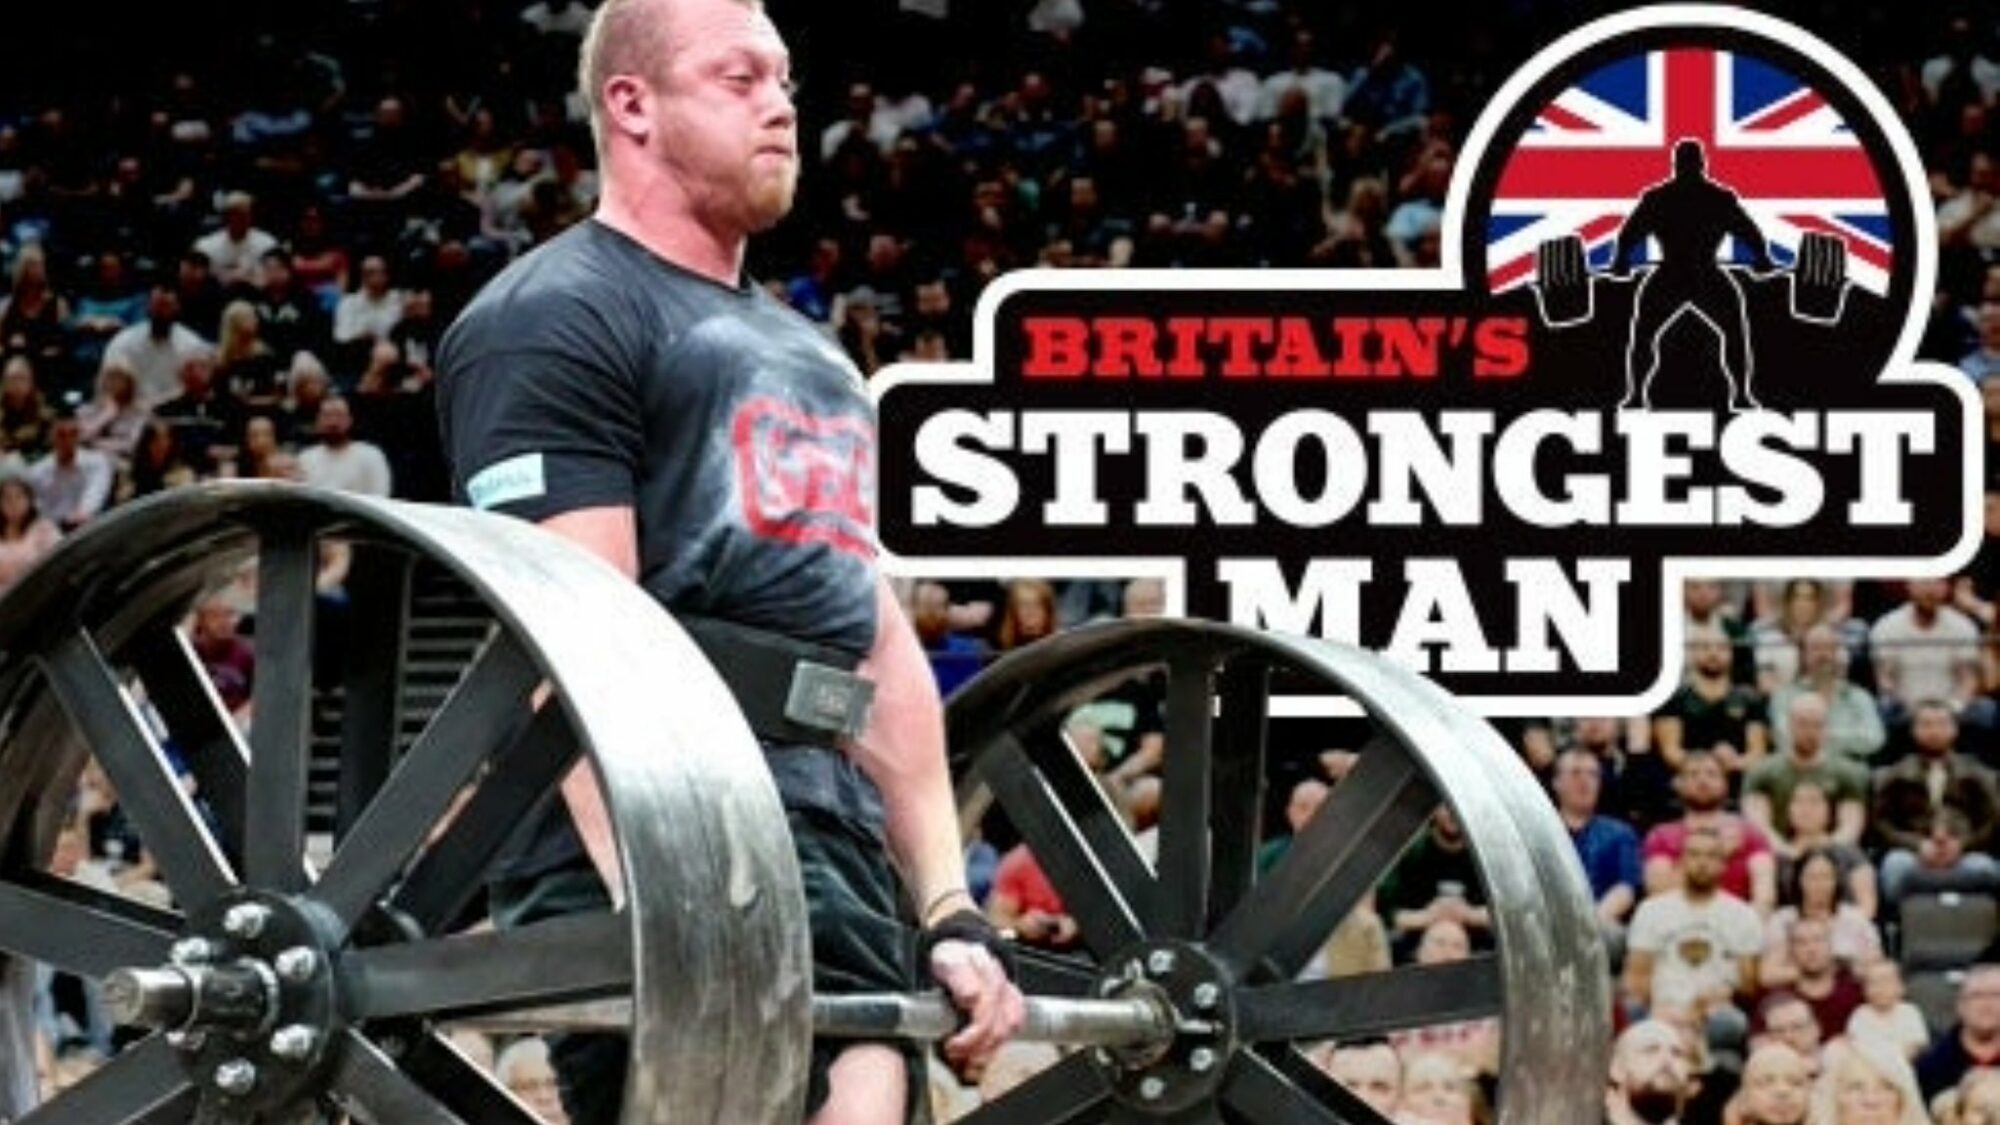 Image name Britains Strongest Man 2024 at Utilita Arena Sheffield Sheffield the 31 image from the post Britain's Strongest Man 2025 at Utilita Arena Sheffield, Sheffield in Yorkshire.com.